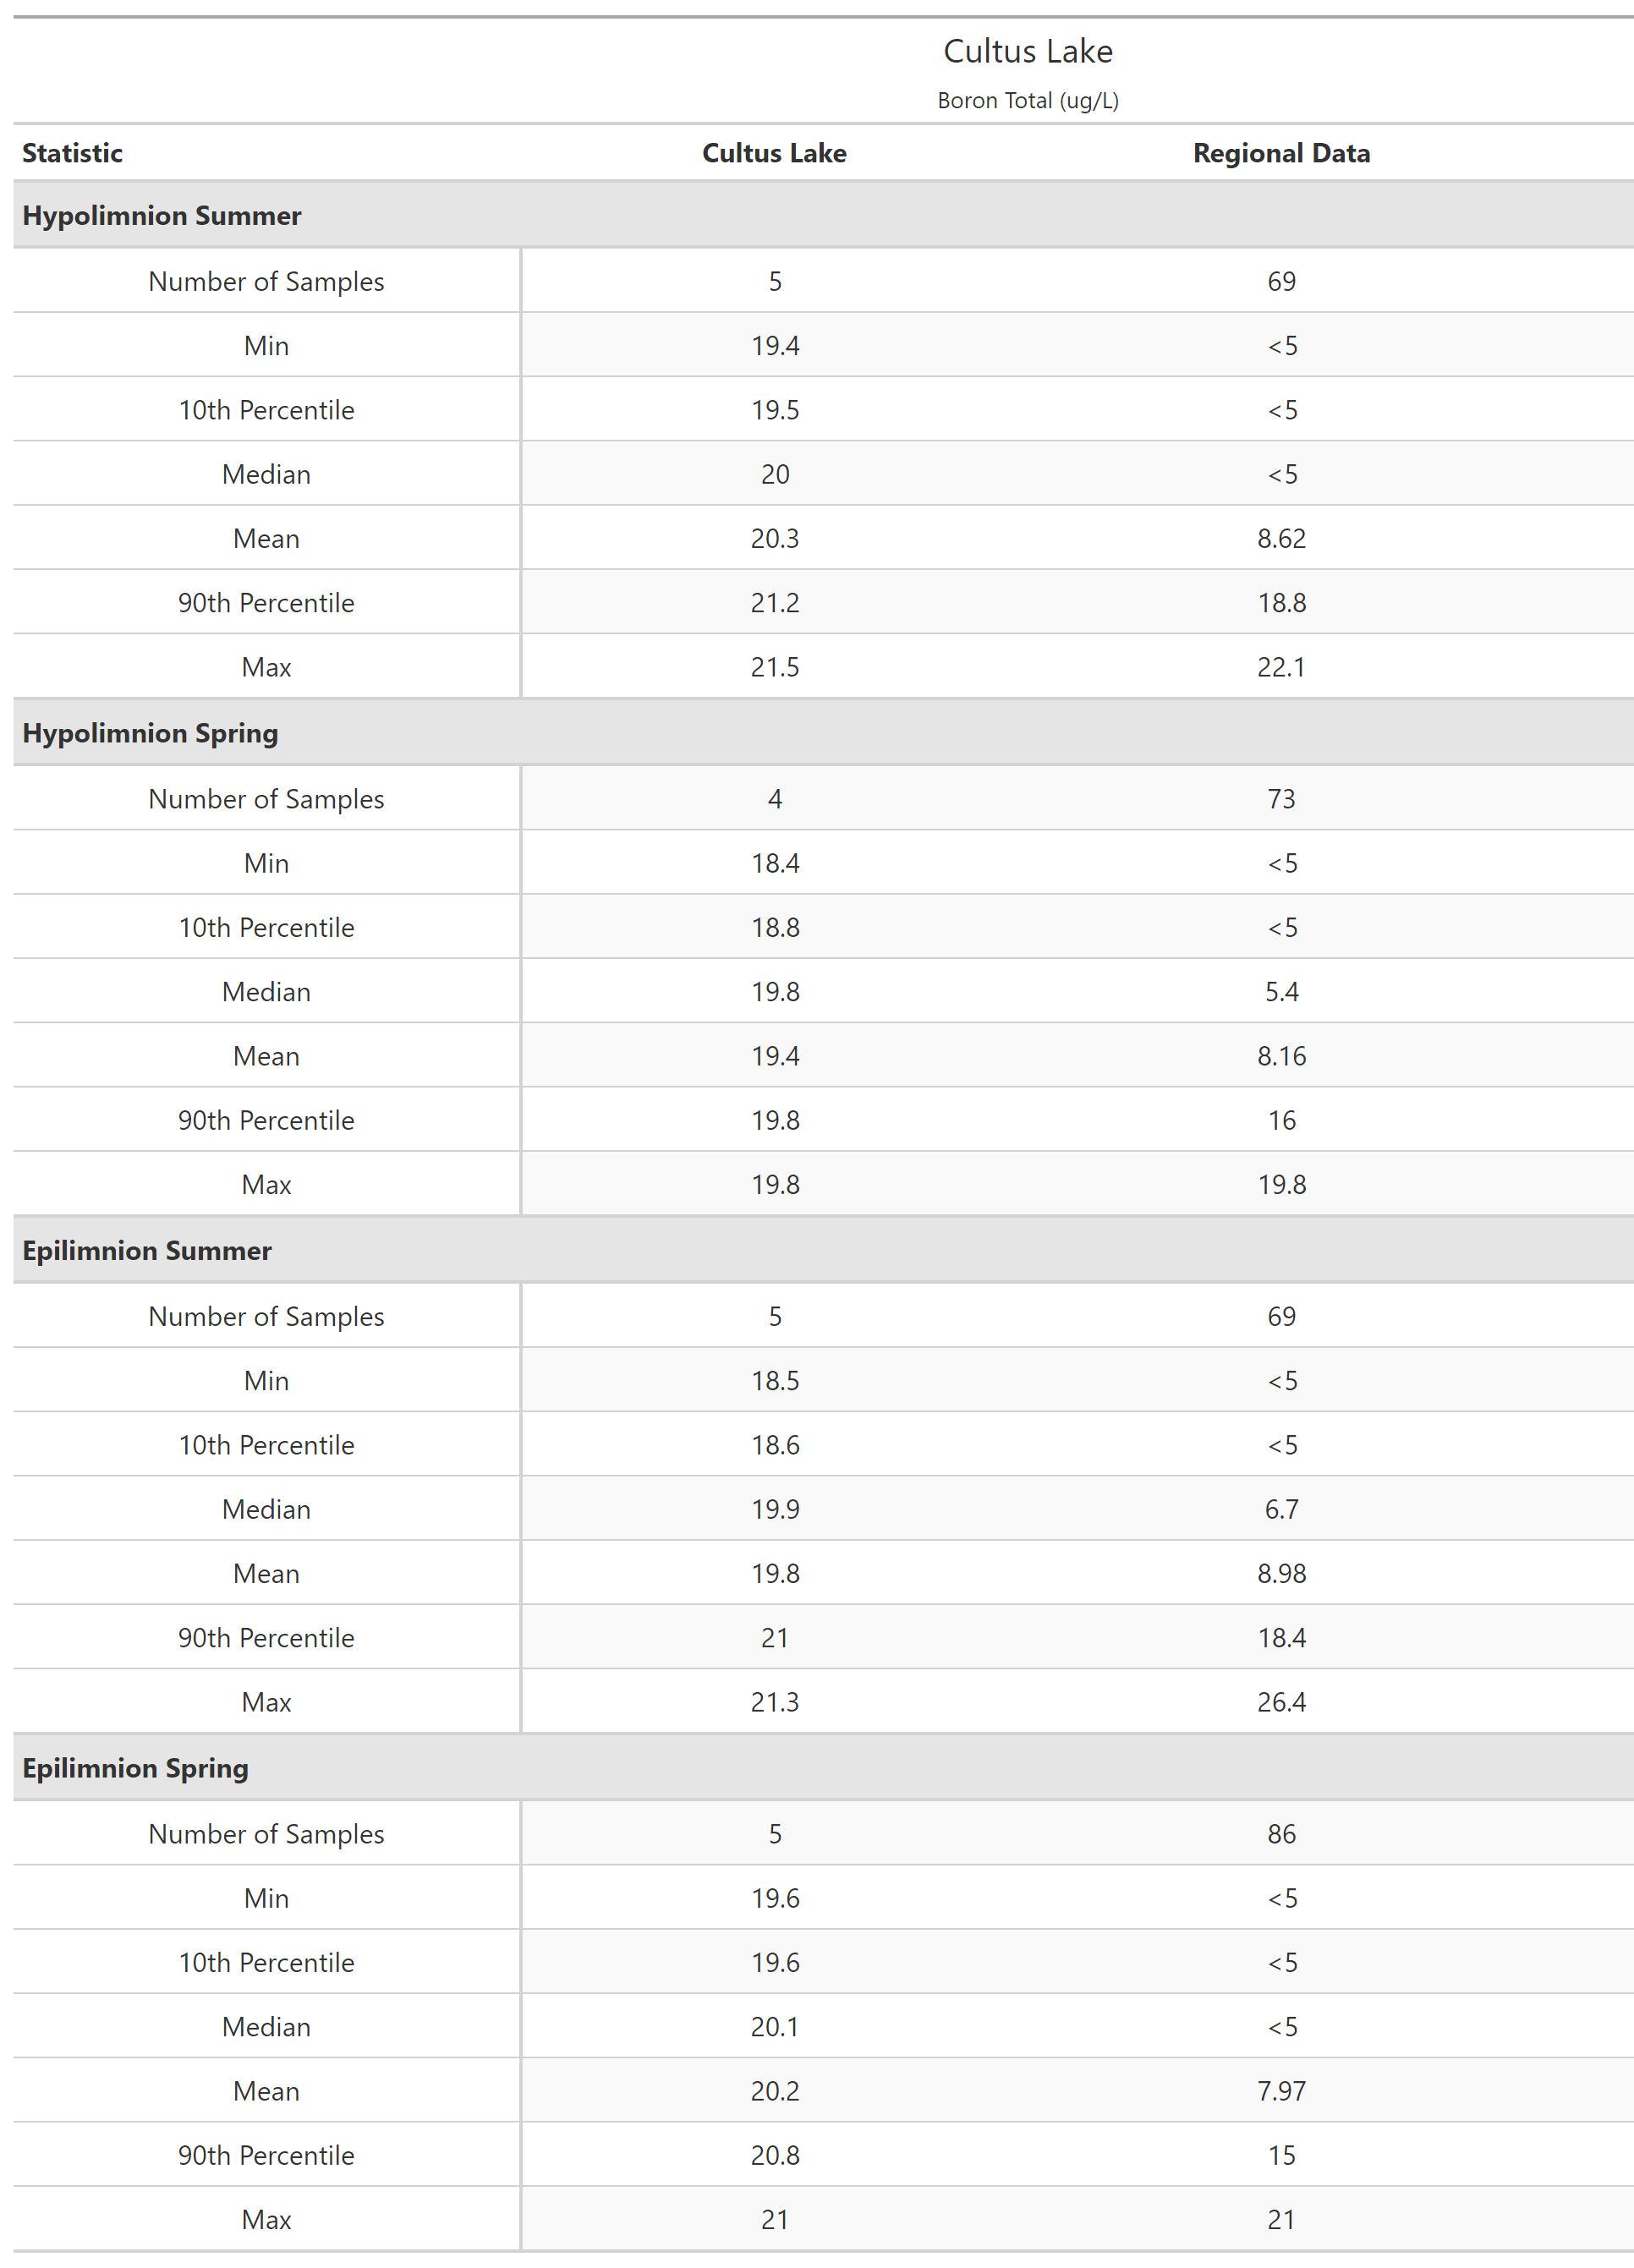 A table of summary statistics for Boron Total with comparison to regional data